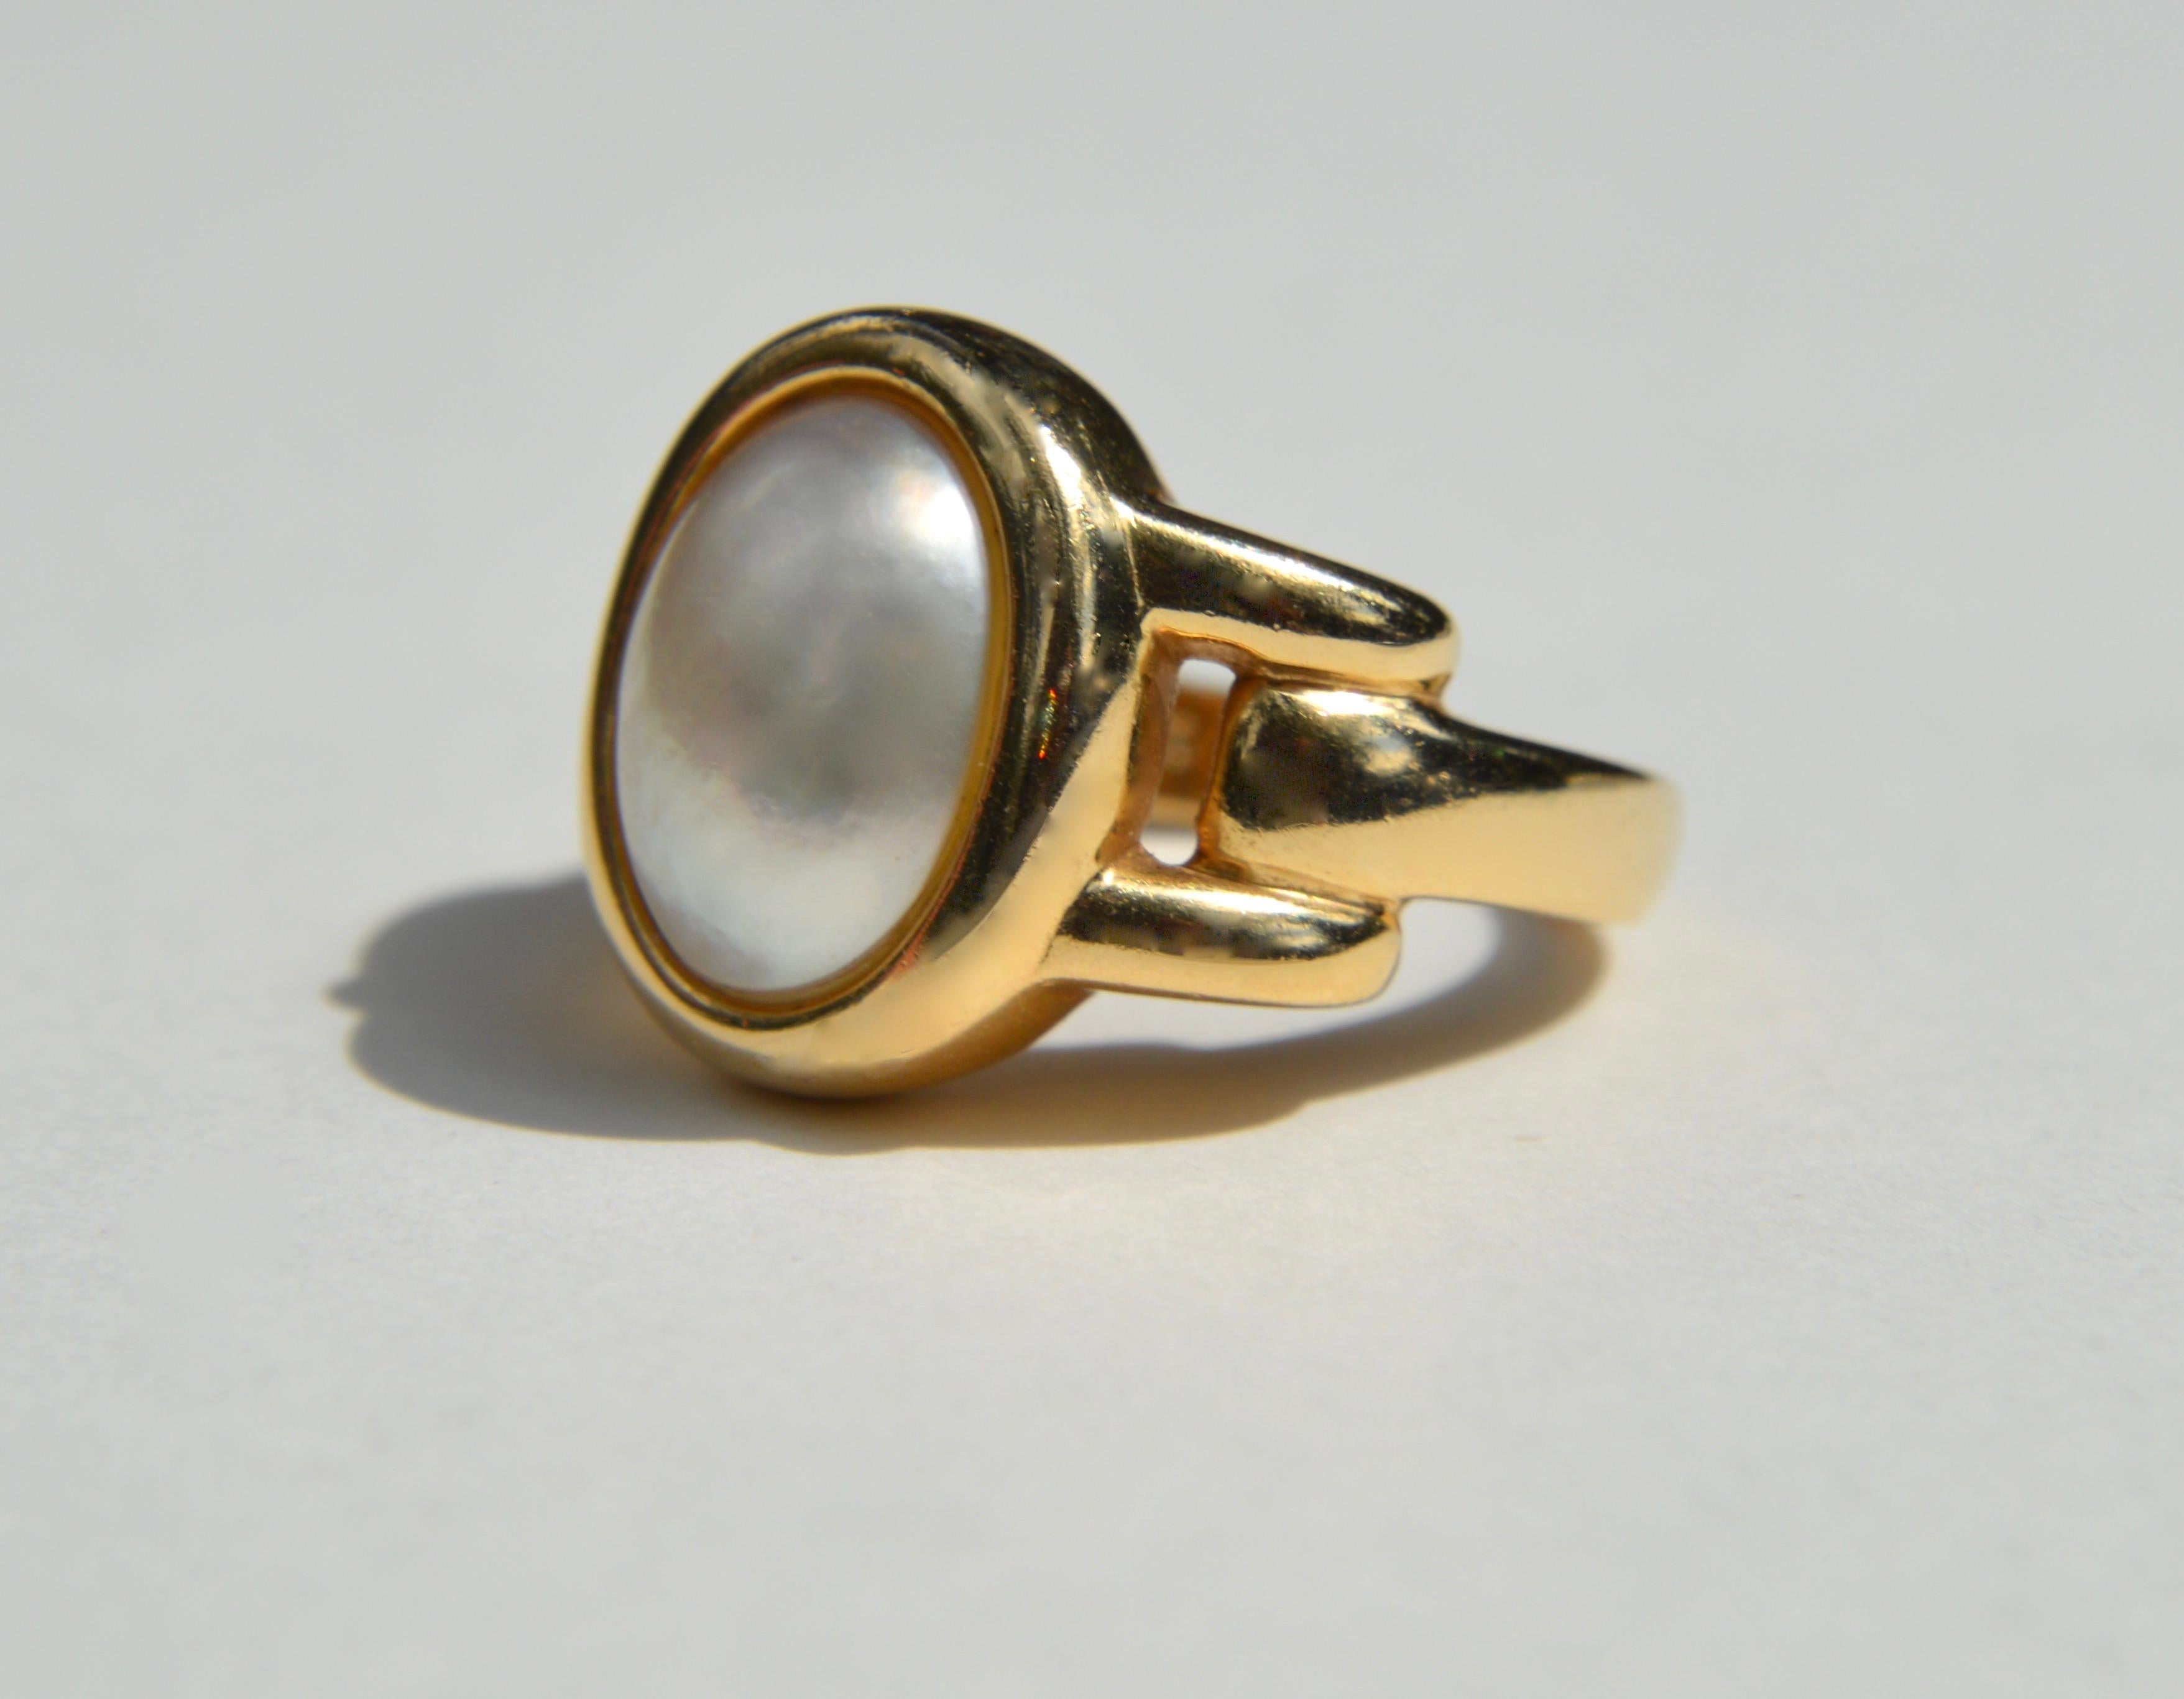 Stunning and oh so classic vintage c1980s 14K yellow gold oval Mabe pearl signet ring. Chain detailing on shoulders. Size 6.5, can be resized by your local jeweler. In excellent condition. Pearl measures 12x10mm. Ring weighs a hefty 7.68 grams.